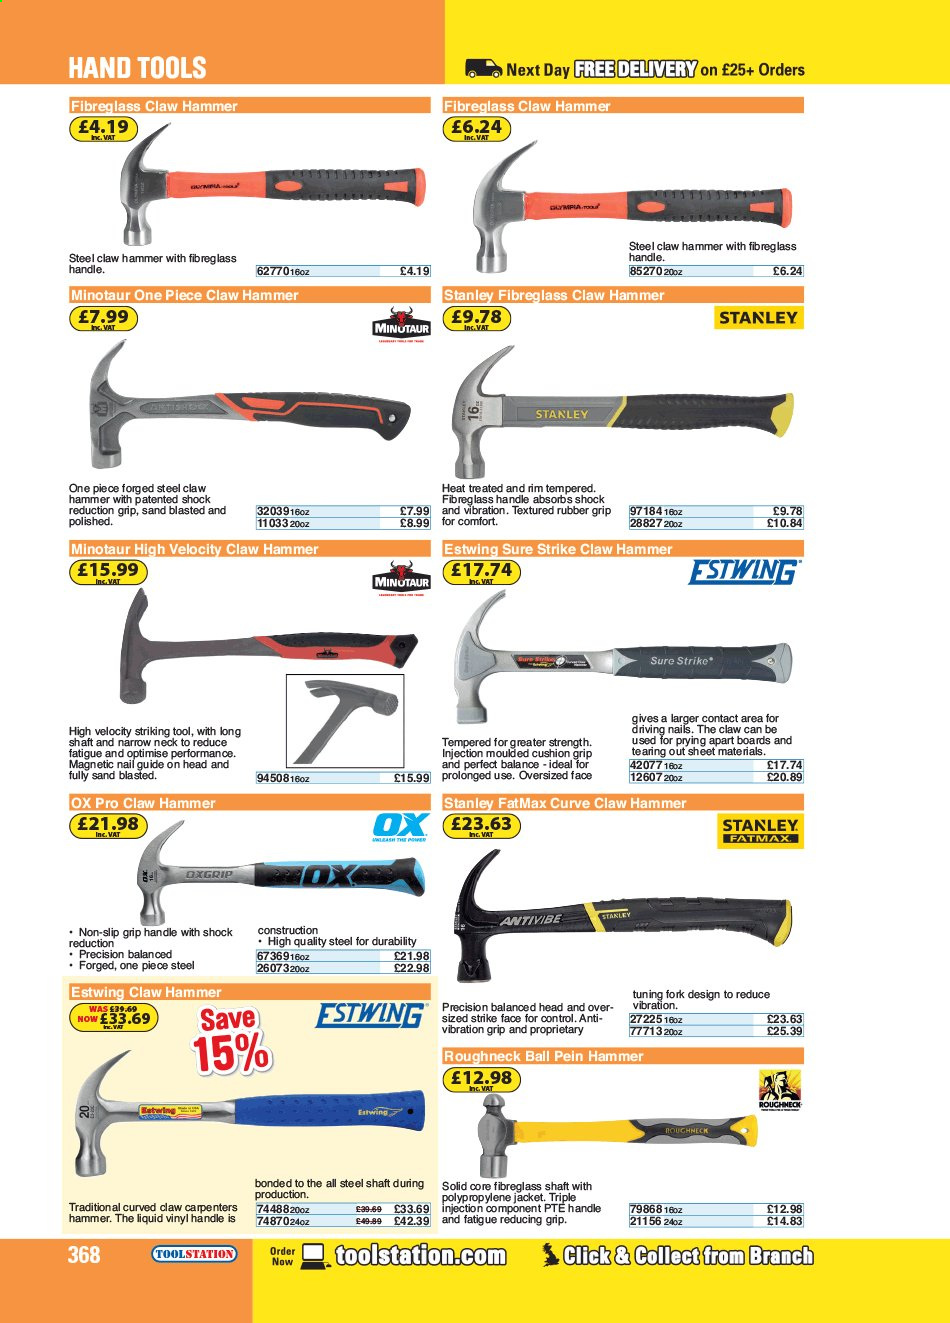 Toolstation offer . Page 368.